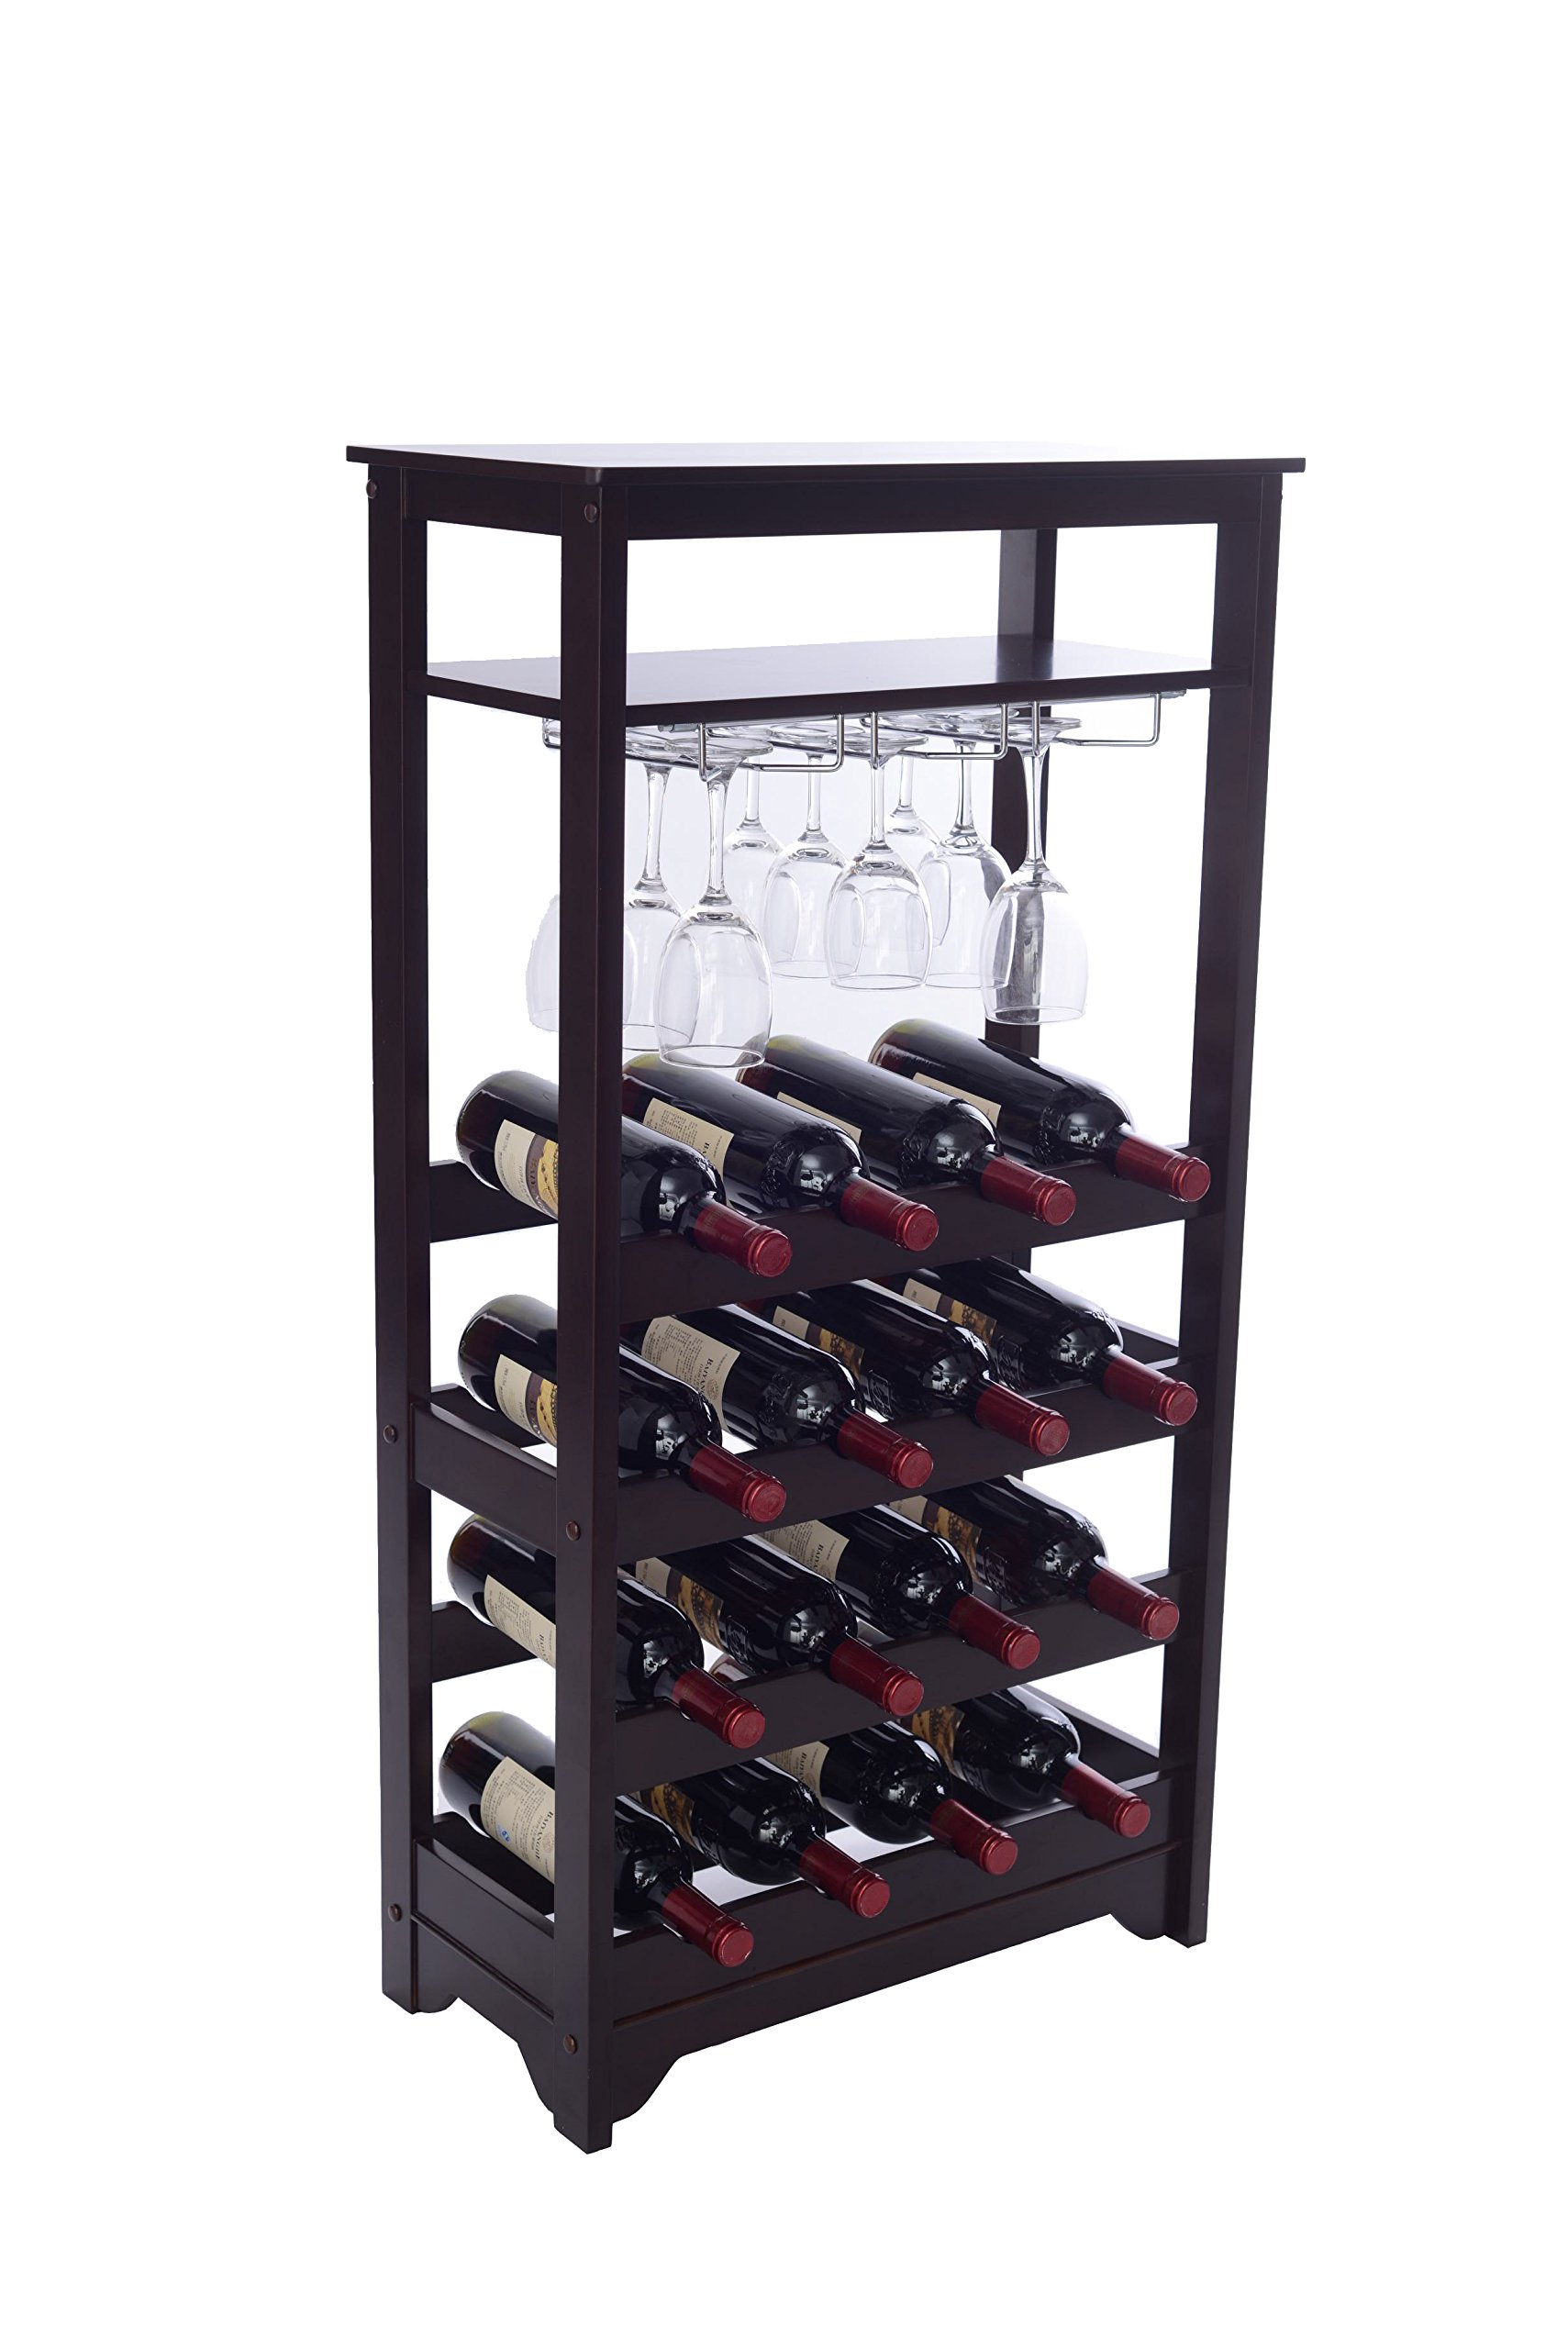 16-Bottle Merry Products Wine Rack (Espresso) $35.90 + Free Shipping